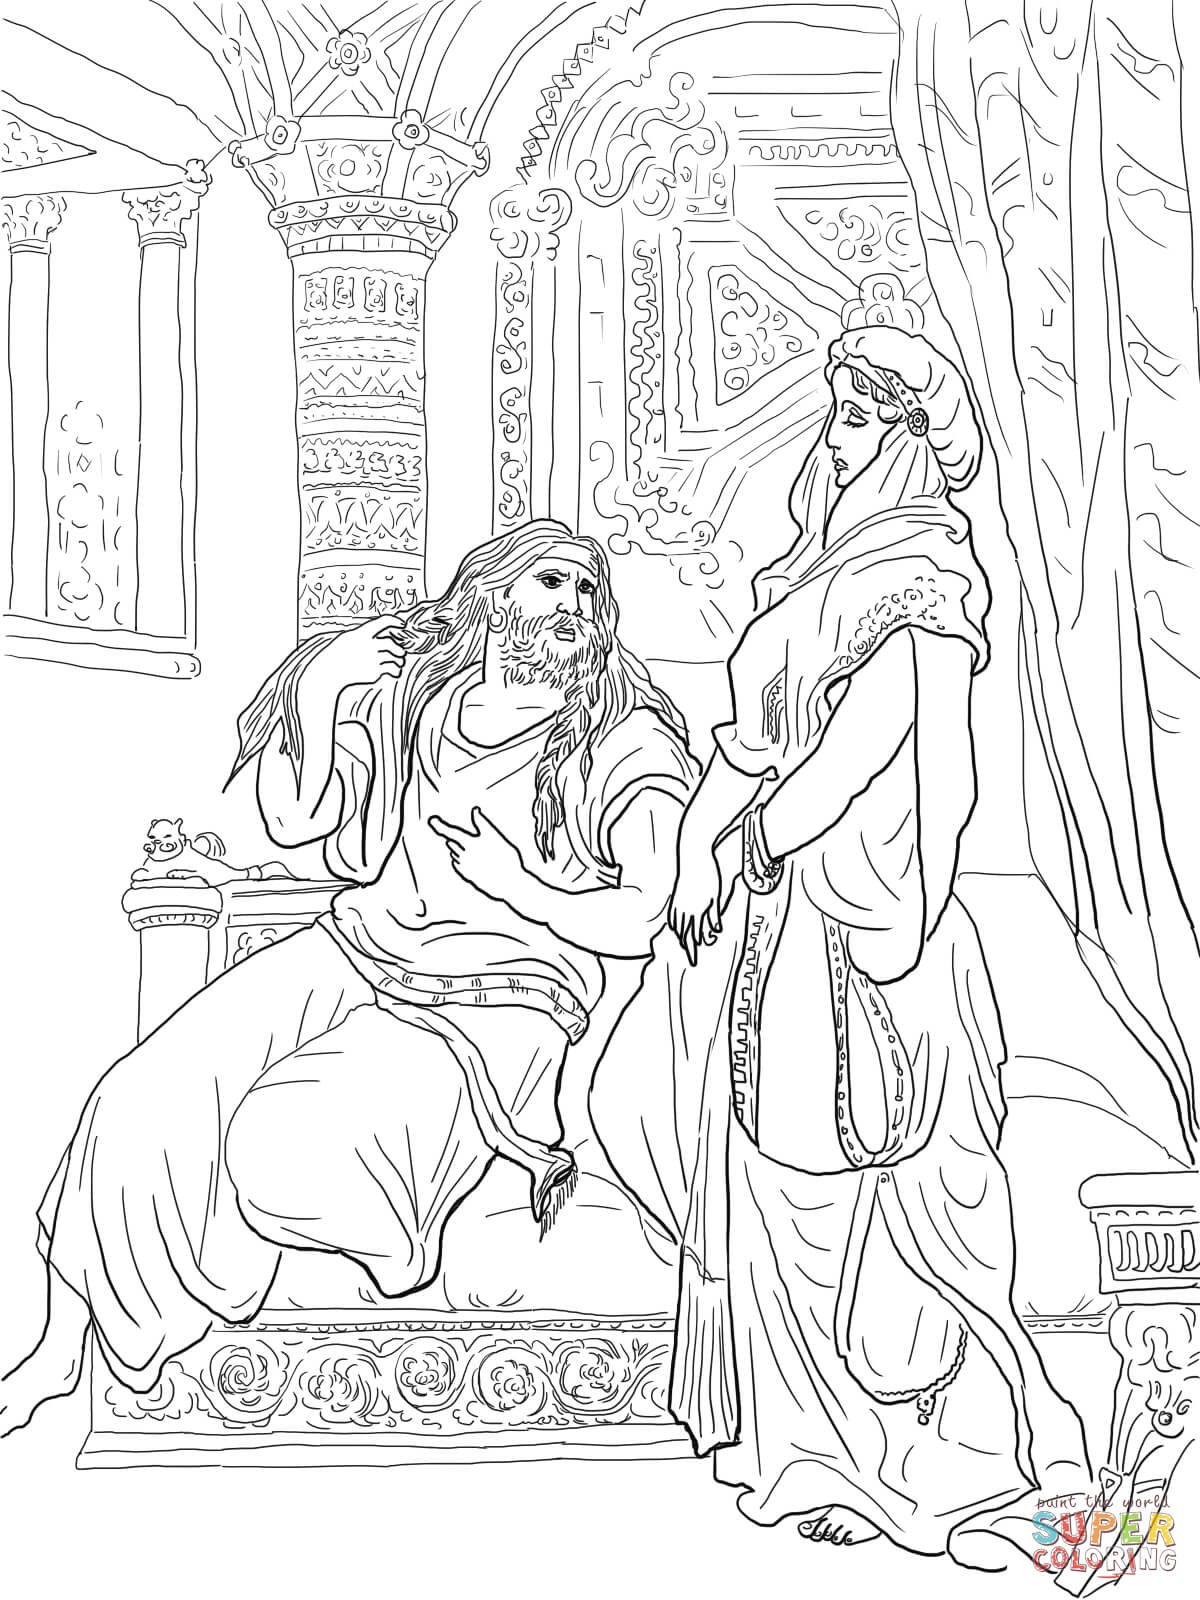 Samson coloring pages | Free Coloring Pages